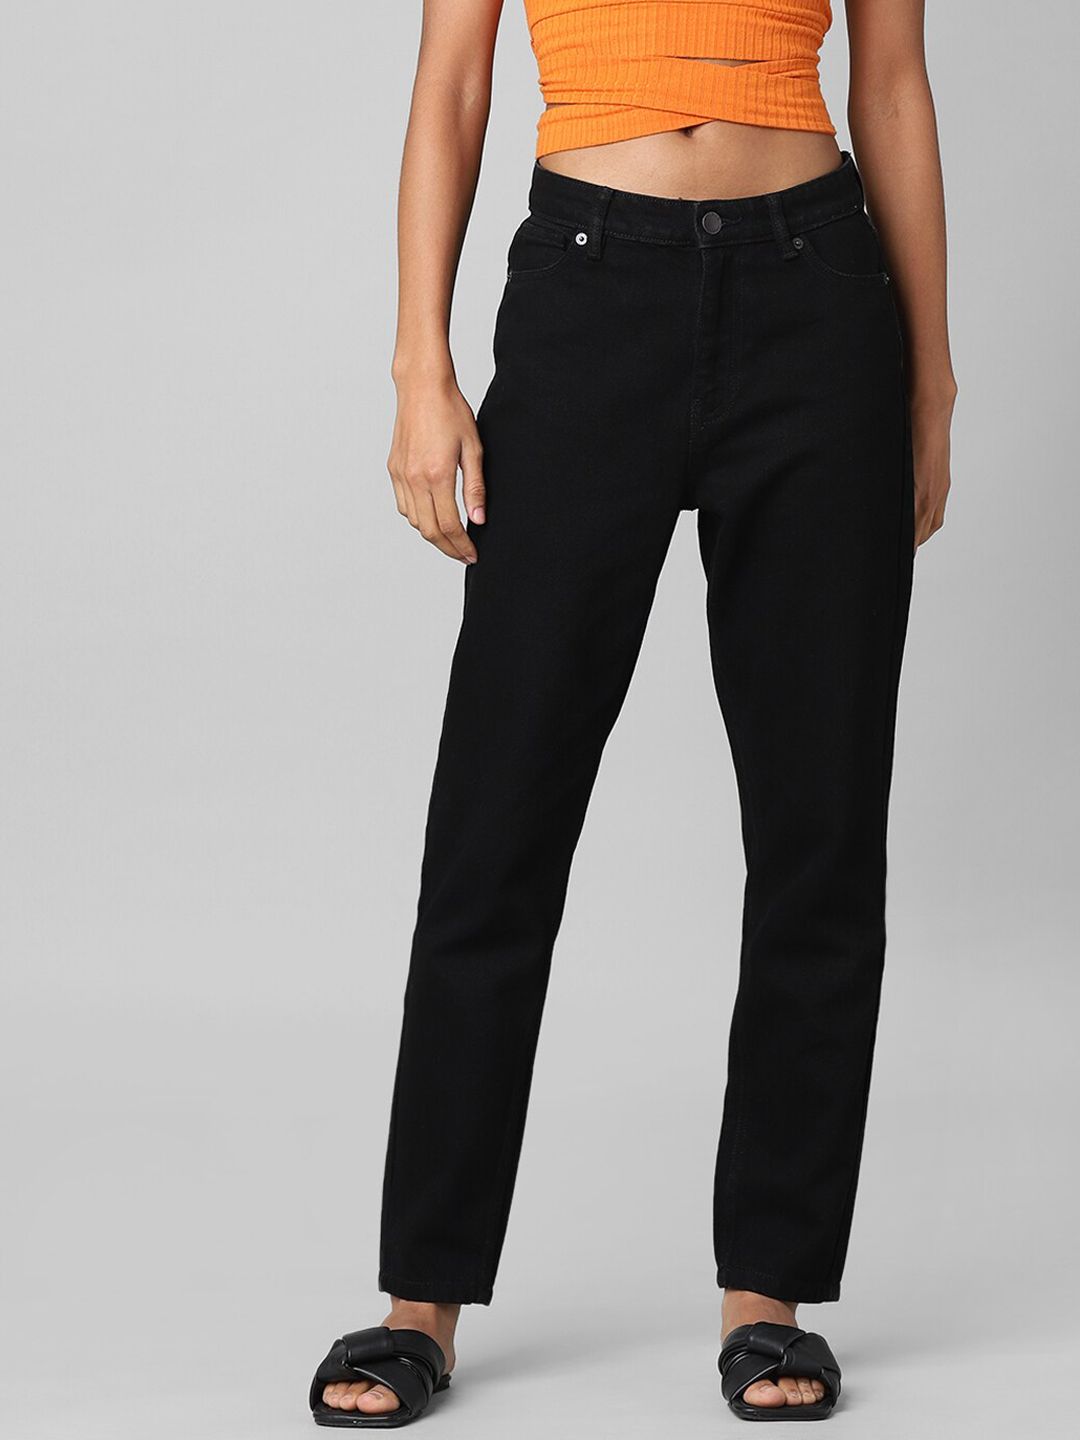 ONLY Women Black Straight Fit High-Rise Jeans Price in India